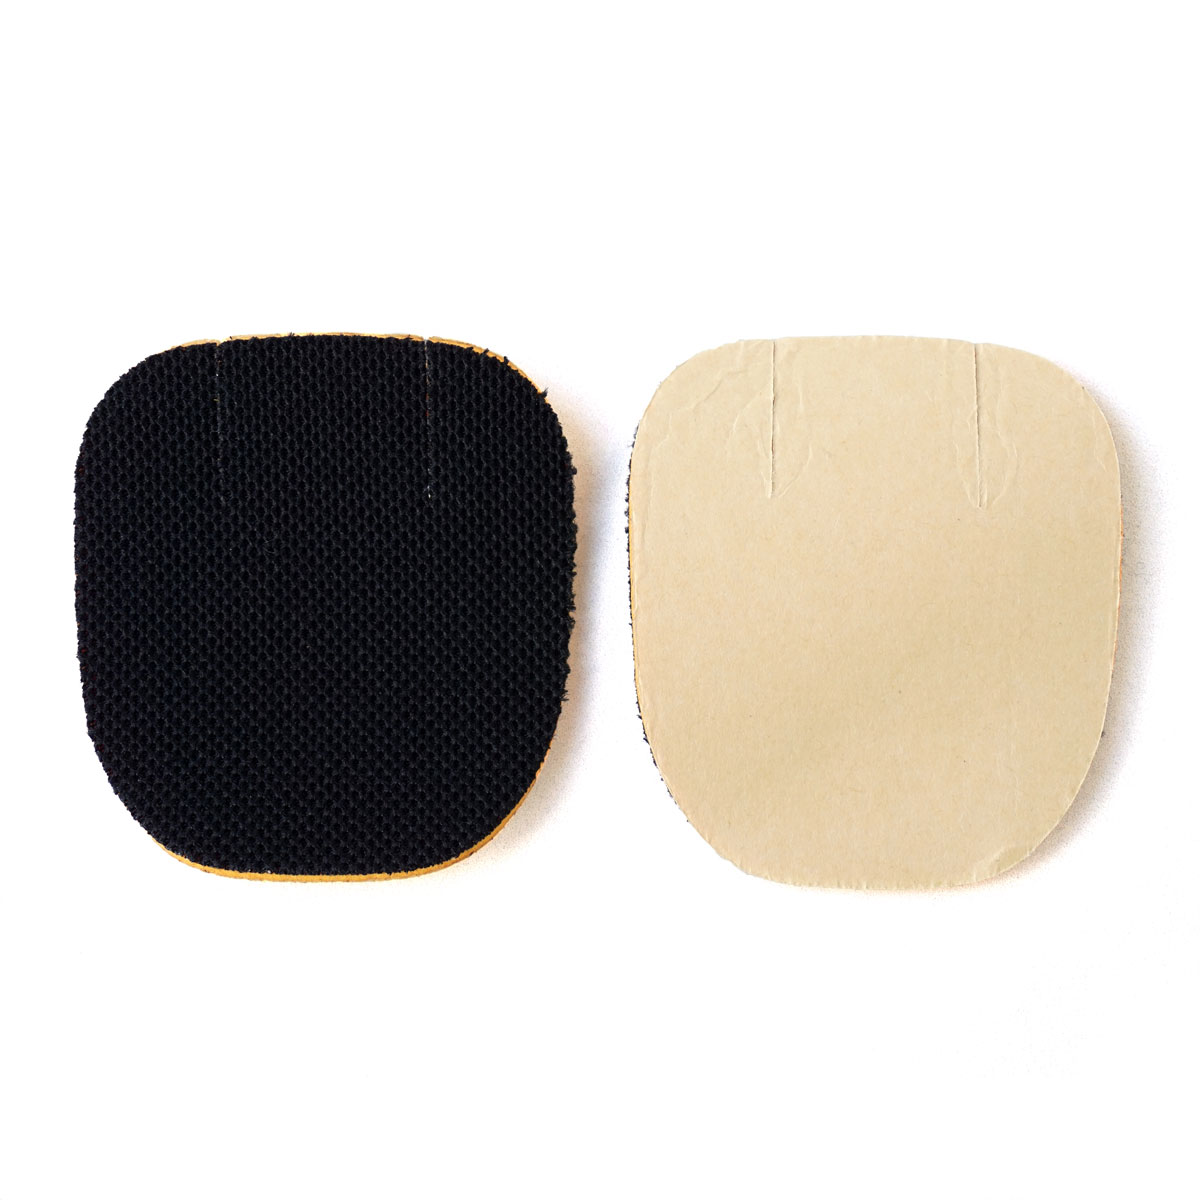 . reverse side pad 1 pair minute (2 sheets ) tongue pad size adjustment shoes scrub shoes gap . comming off large small shoes pair. . support shoe tongue pad made in Japan PAD11